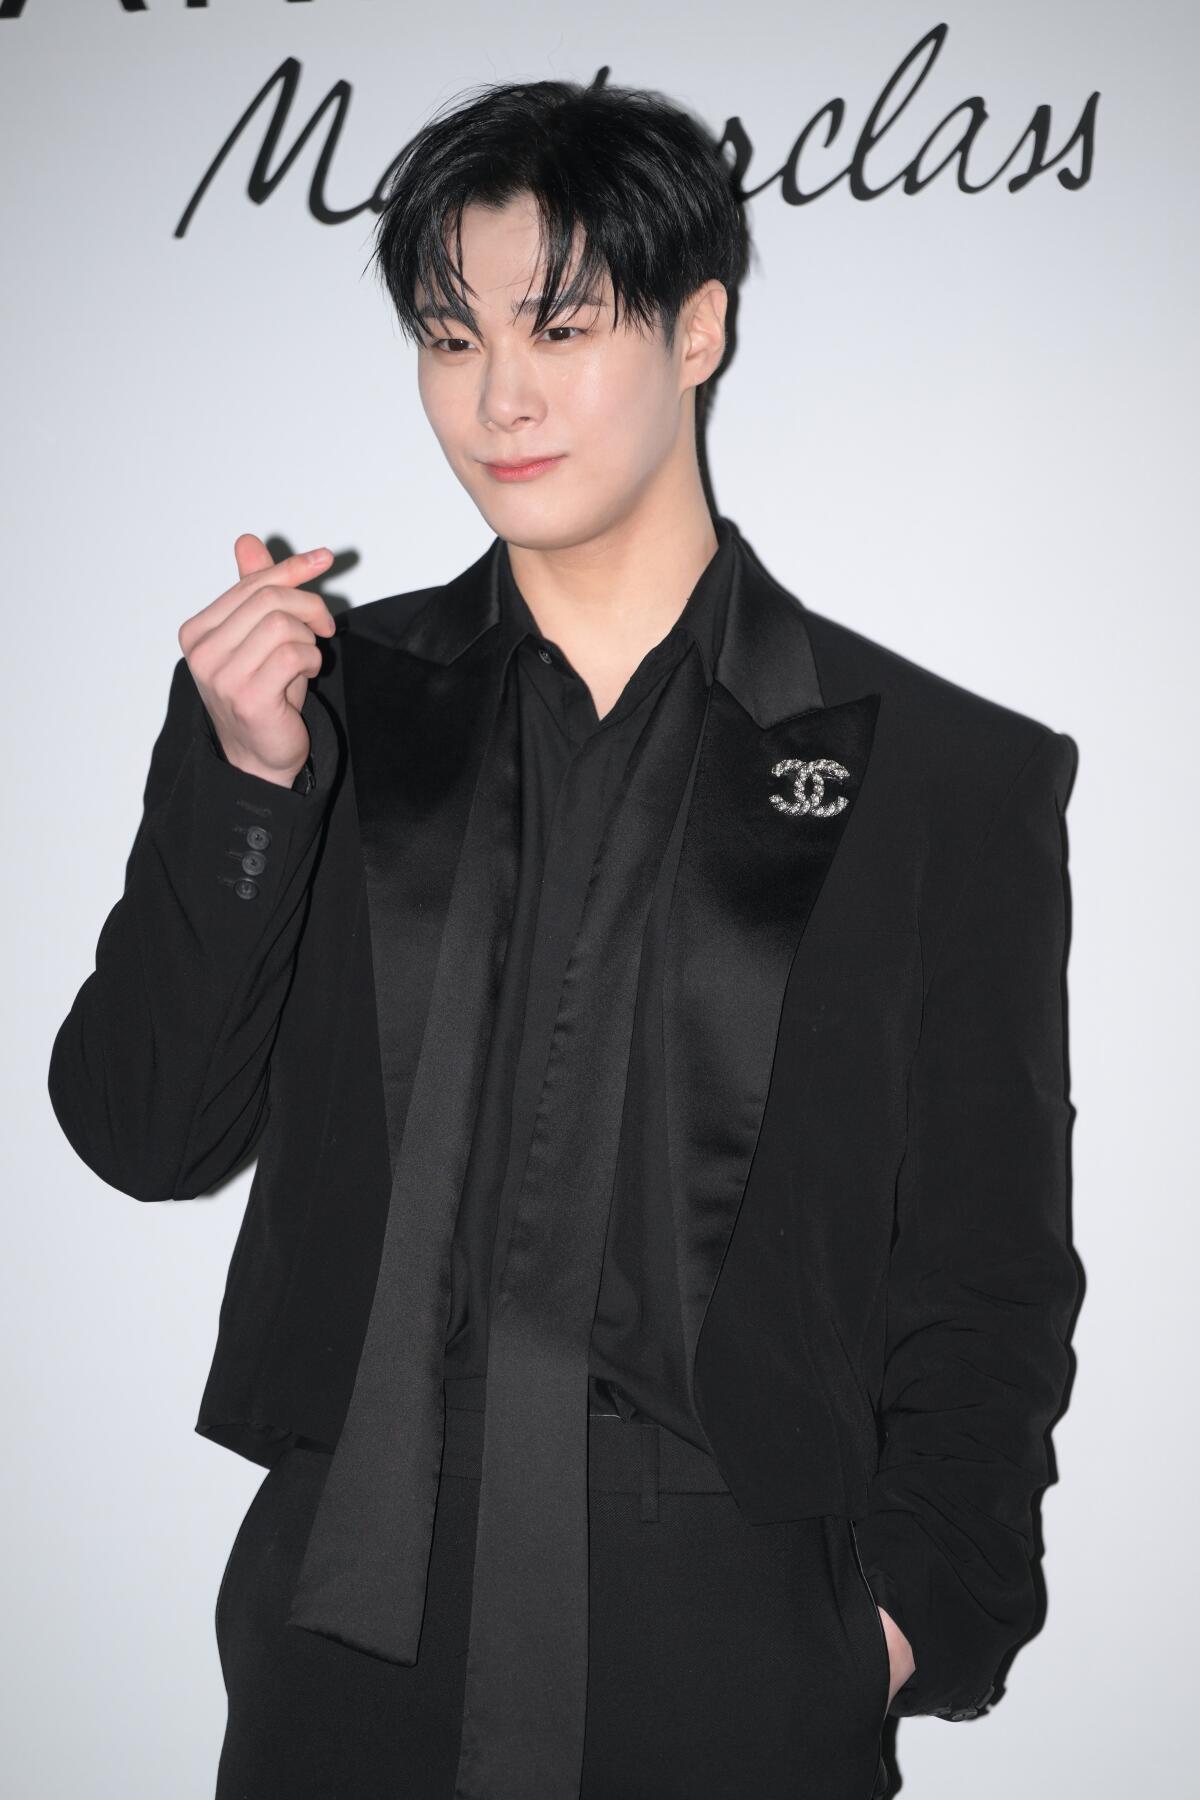 Moon Bin of K-pop group Astro poses in a black suit with one hand in his pocket and the other near his shoulder